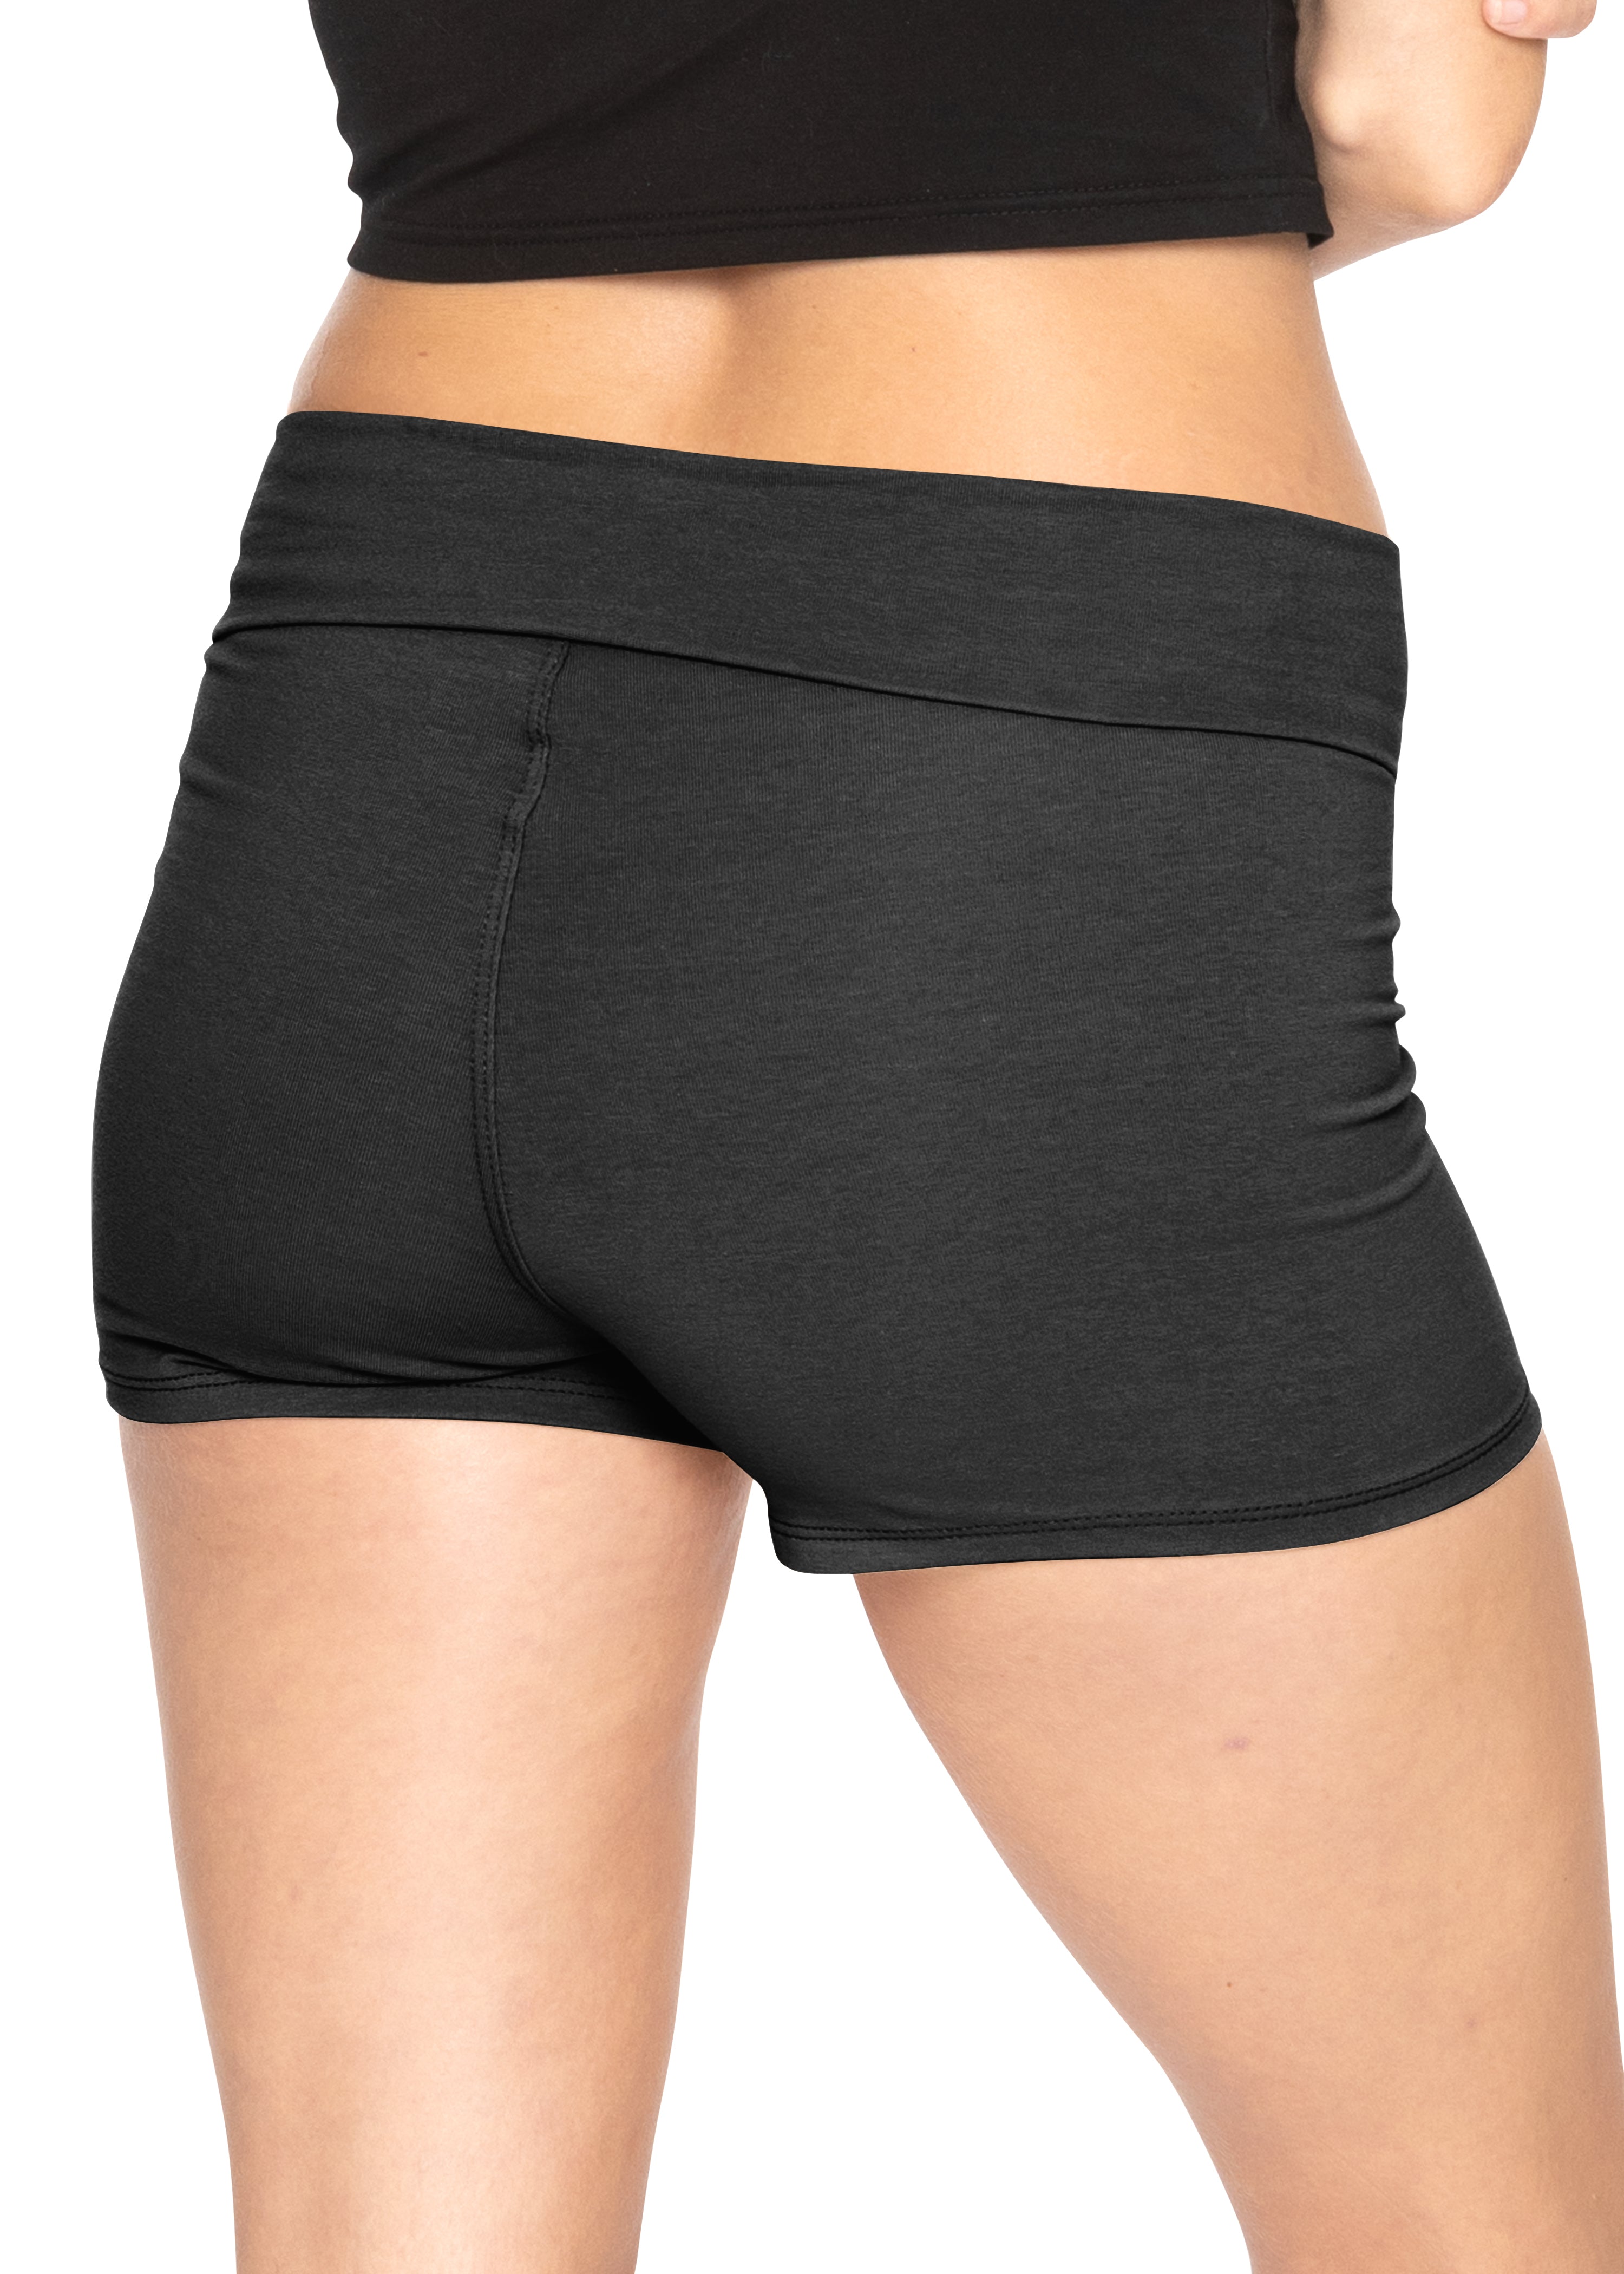 Stretch Is Comfort Women's Teamwear Foldover Yoga Shorts | Adult Small - 3x - image 3 of 6